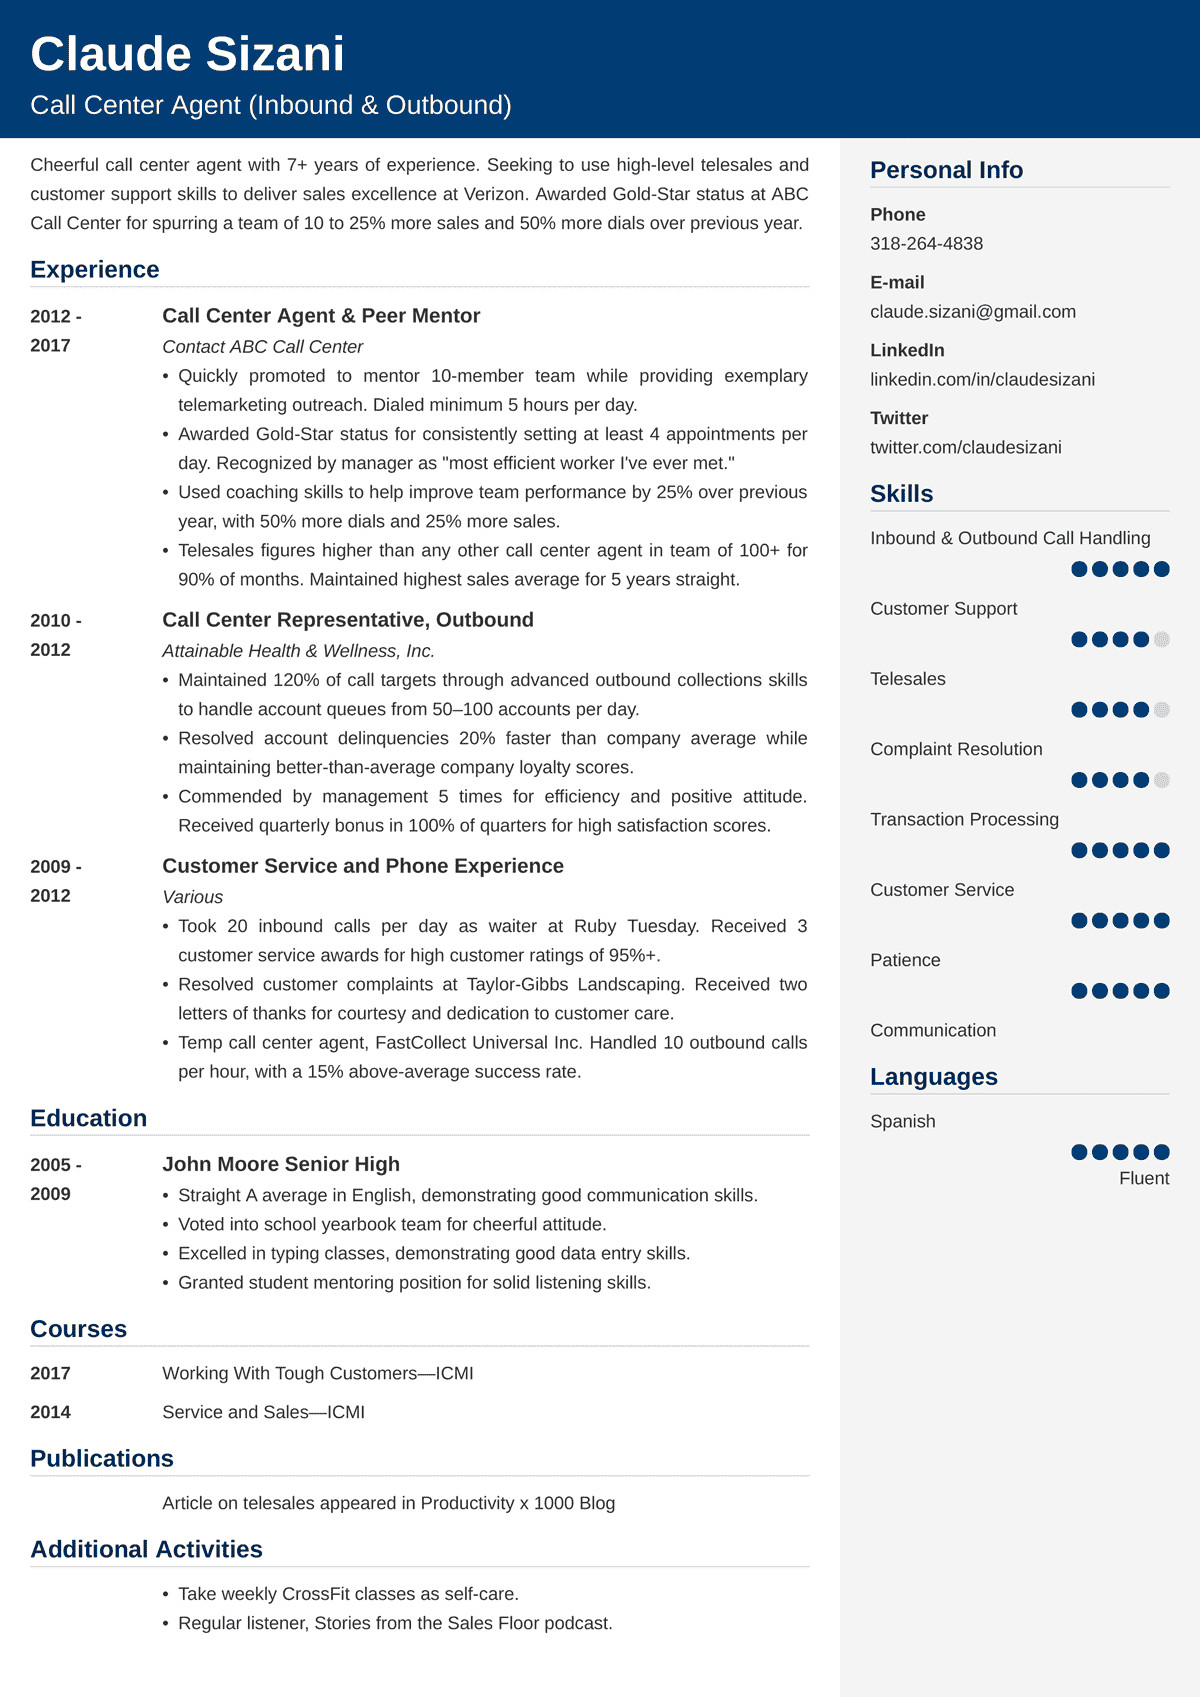 Call Center Resume Sample with Experience Call Center Resume Sample—25 Examples and Writing Tips